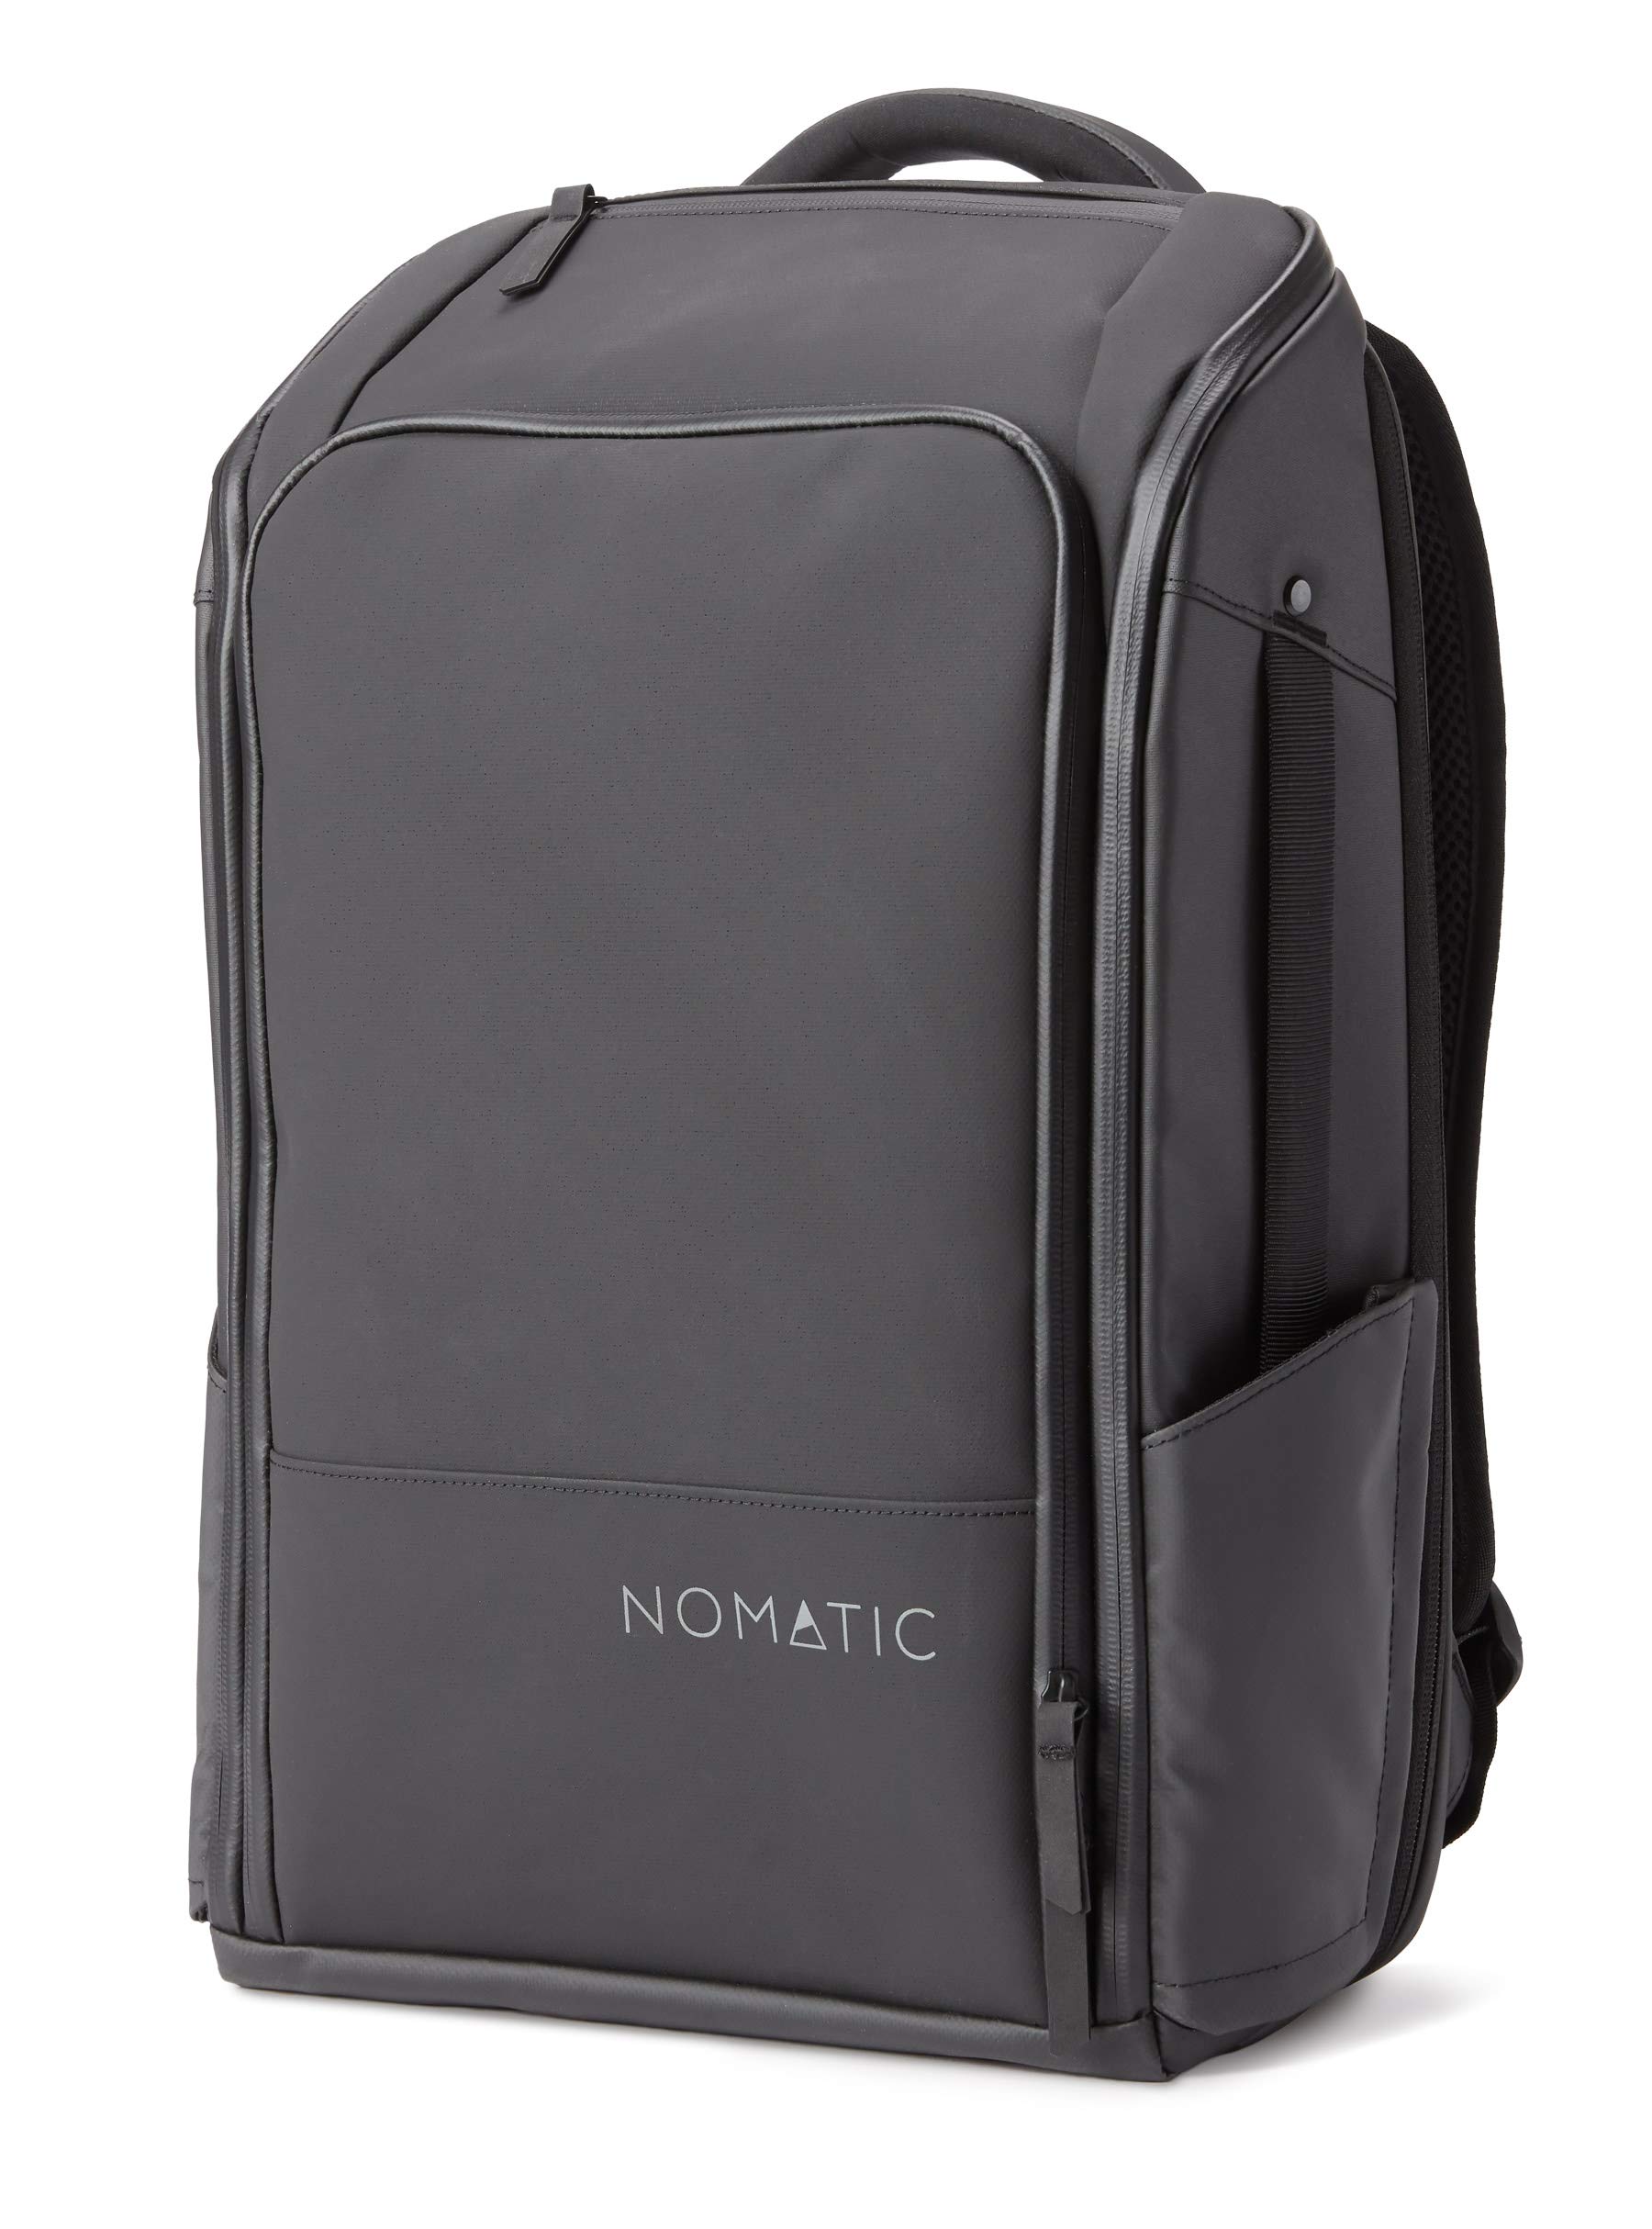 NOMATIC Backpack- Travel Carry On Backpack - Laptop Bag 20L - Water Resistant Travel Backpack - Traveling Carry On Backpack for Women and Men- Business Backpack - Personal Item Bag